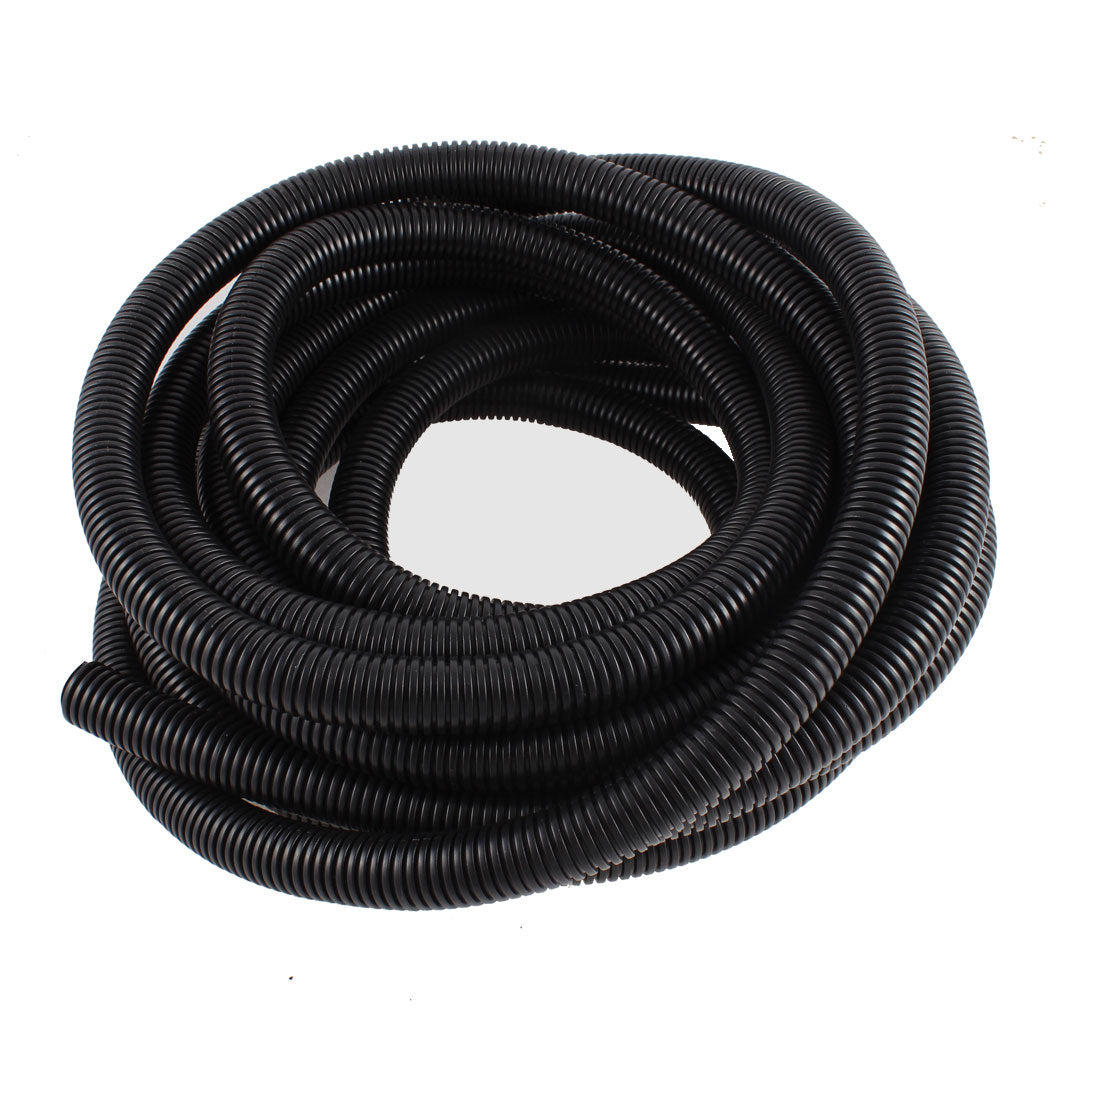 uxcell Uxcell 8 M 17.2 x 21.2 mm Plastic Corrugated Conduit Tube for Garden,Office Black